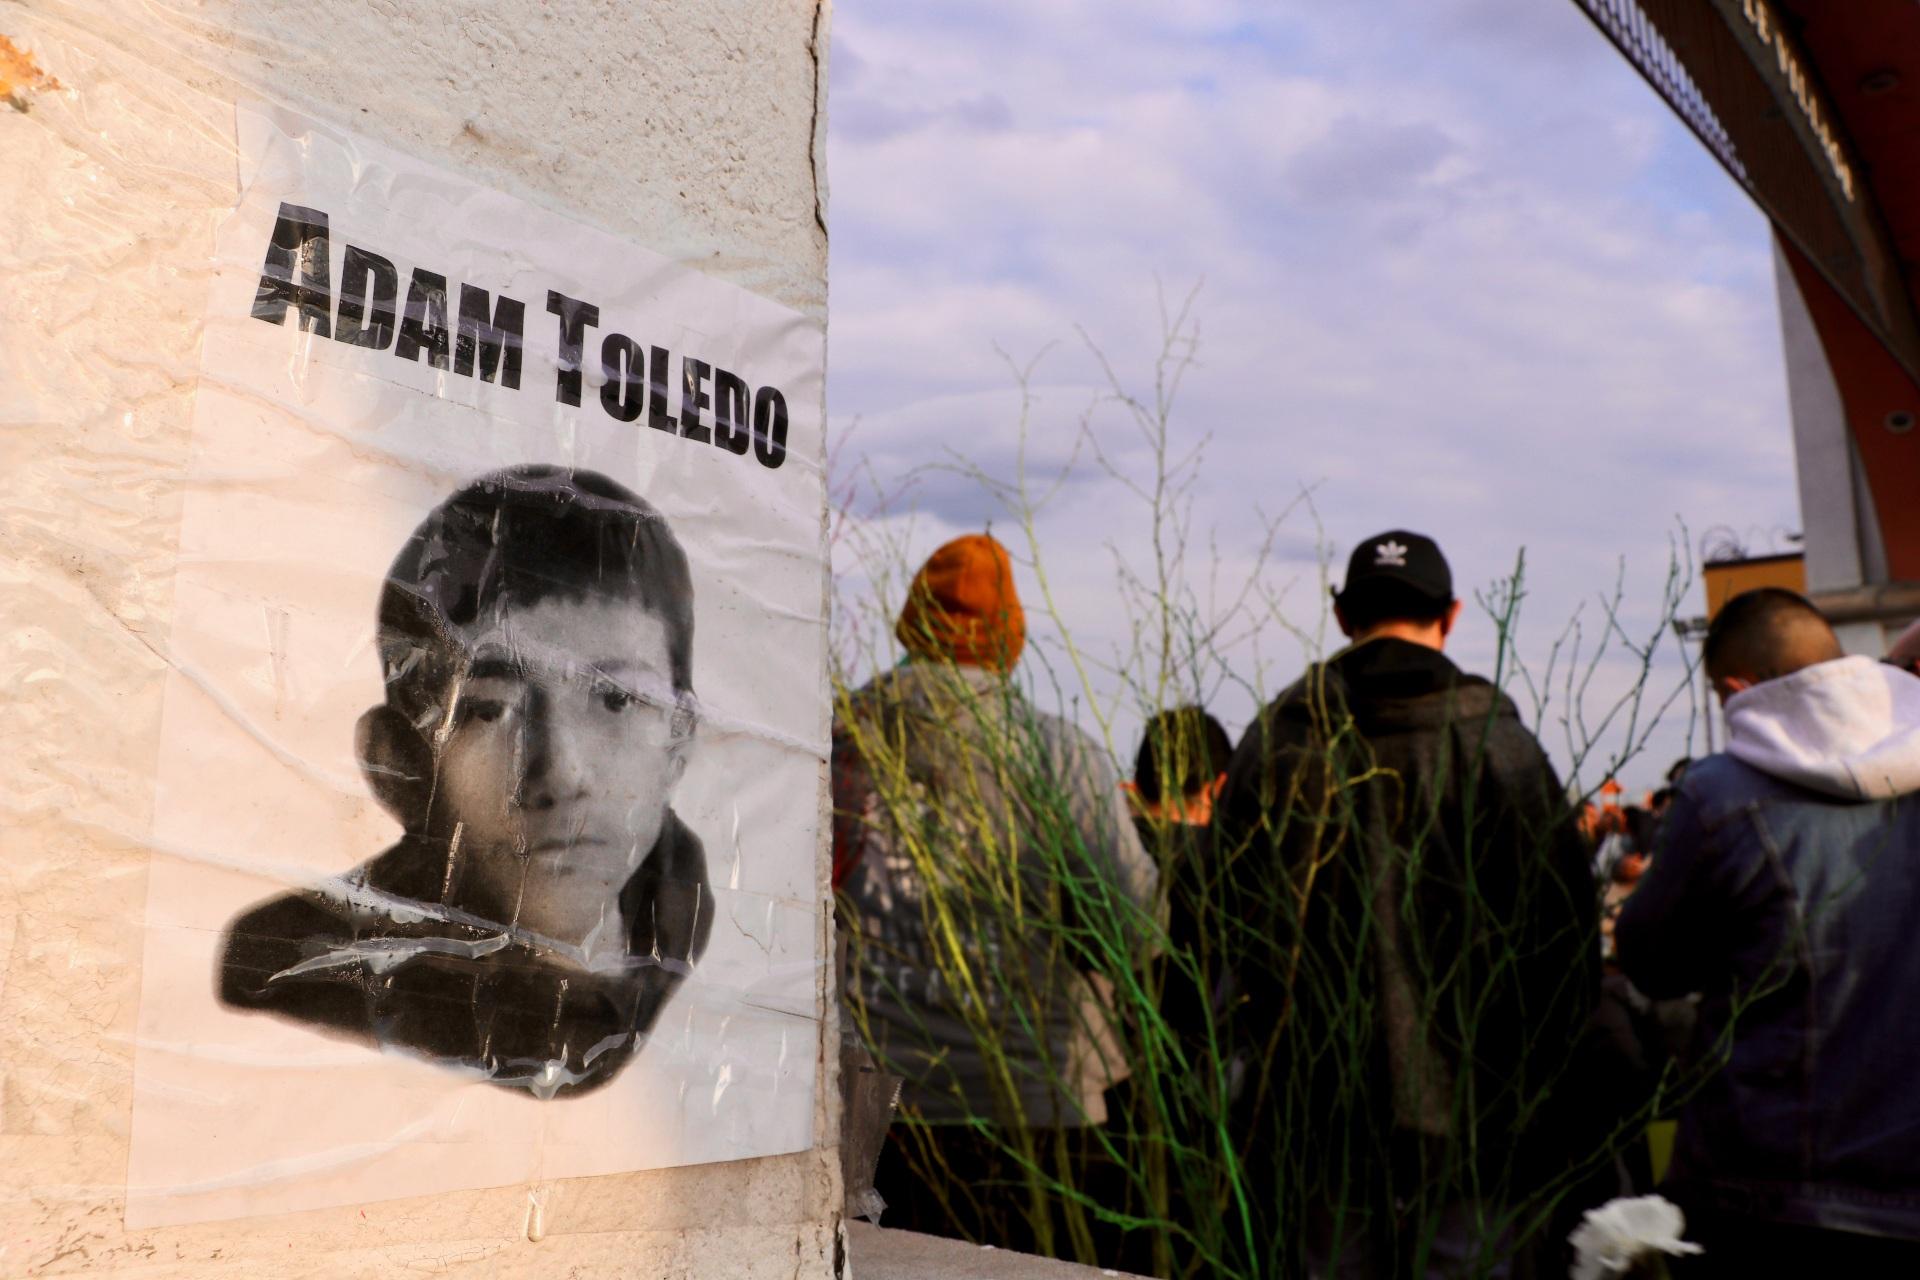 A photo of 13-year-old Adam Toledo taped to the Little Village arch during the April 18, 2021 peace walk. Toledo was fatally shot by a police officer on March 29, 2021. (Evan Garcia / WTTW News)